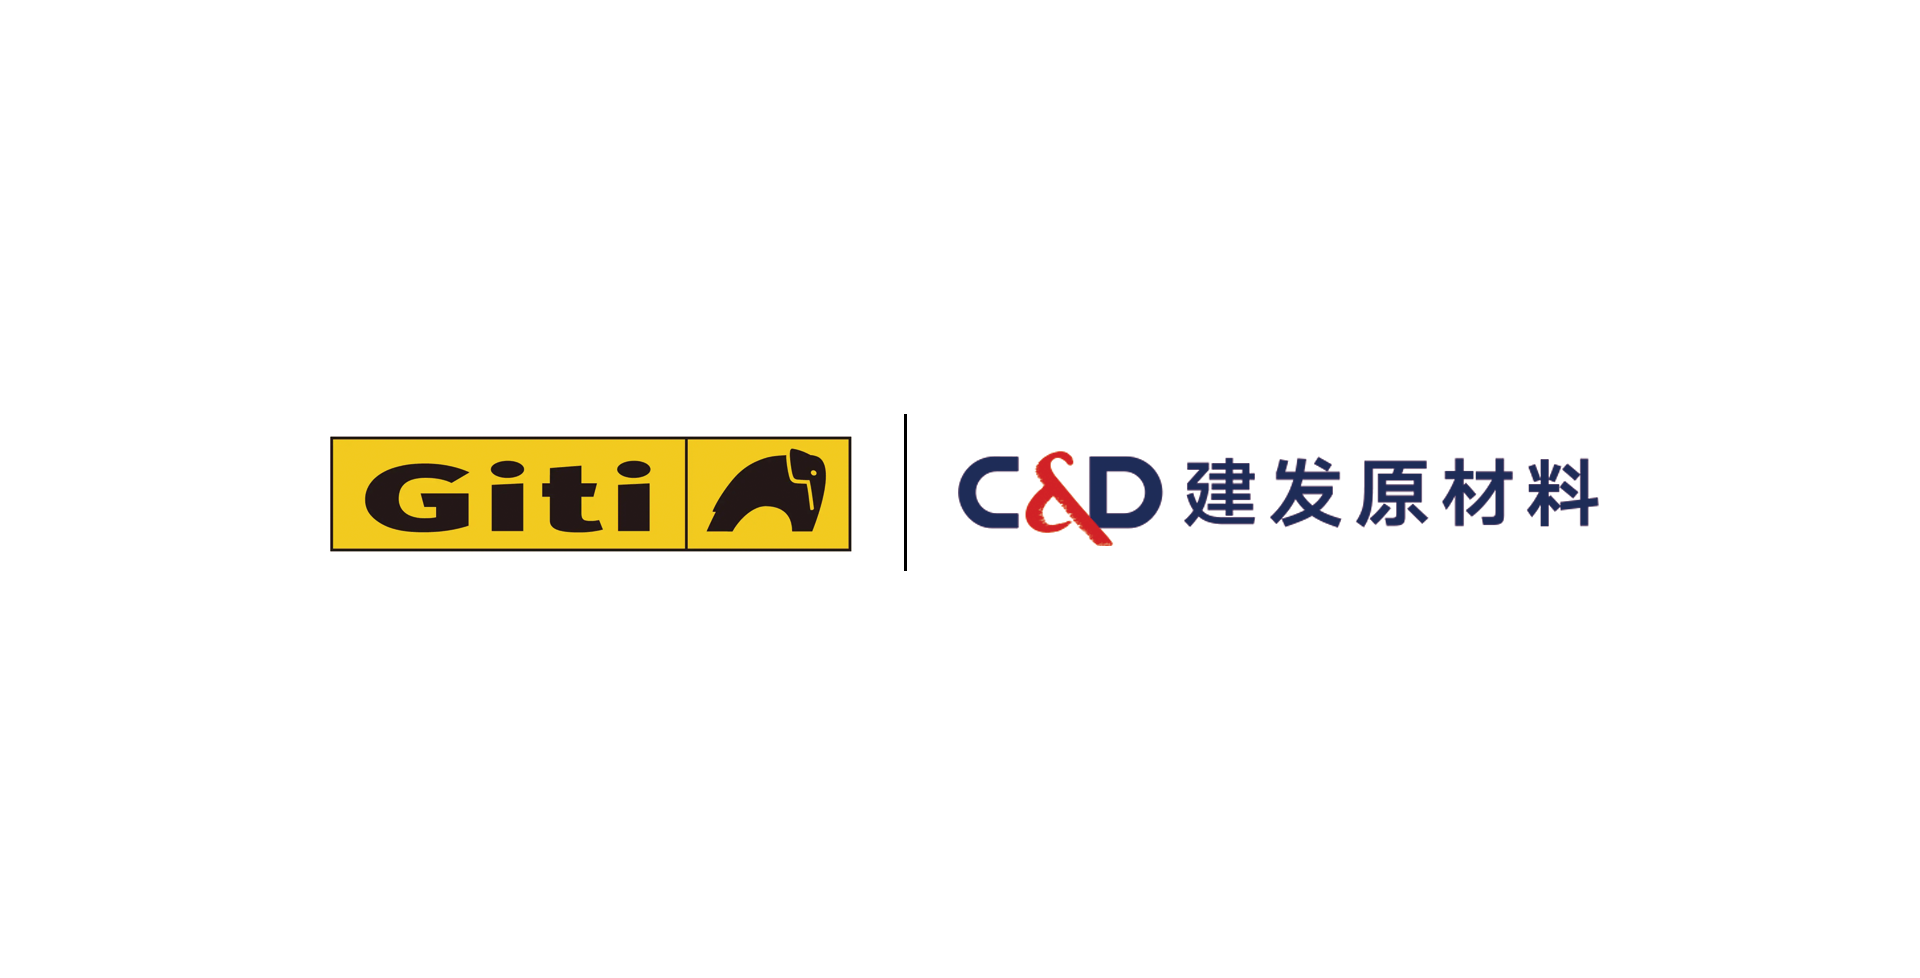 C&amp;D Commodity Trading Granted Supplier Access to Internationally Renowned Tire Manufacturers and Achieved Regular Distribution